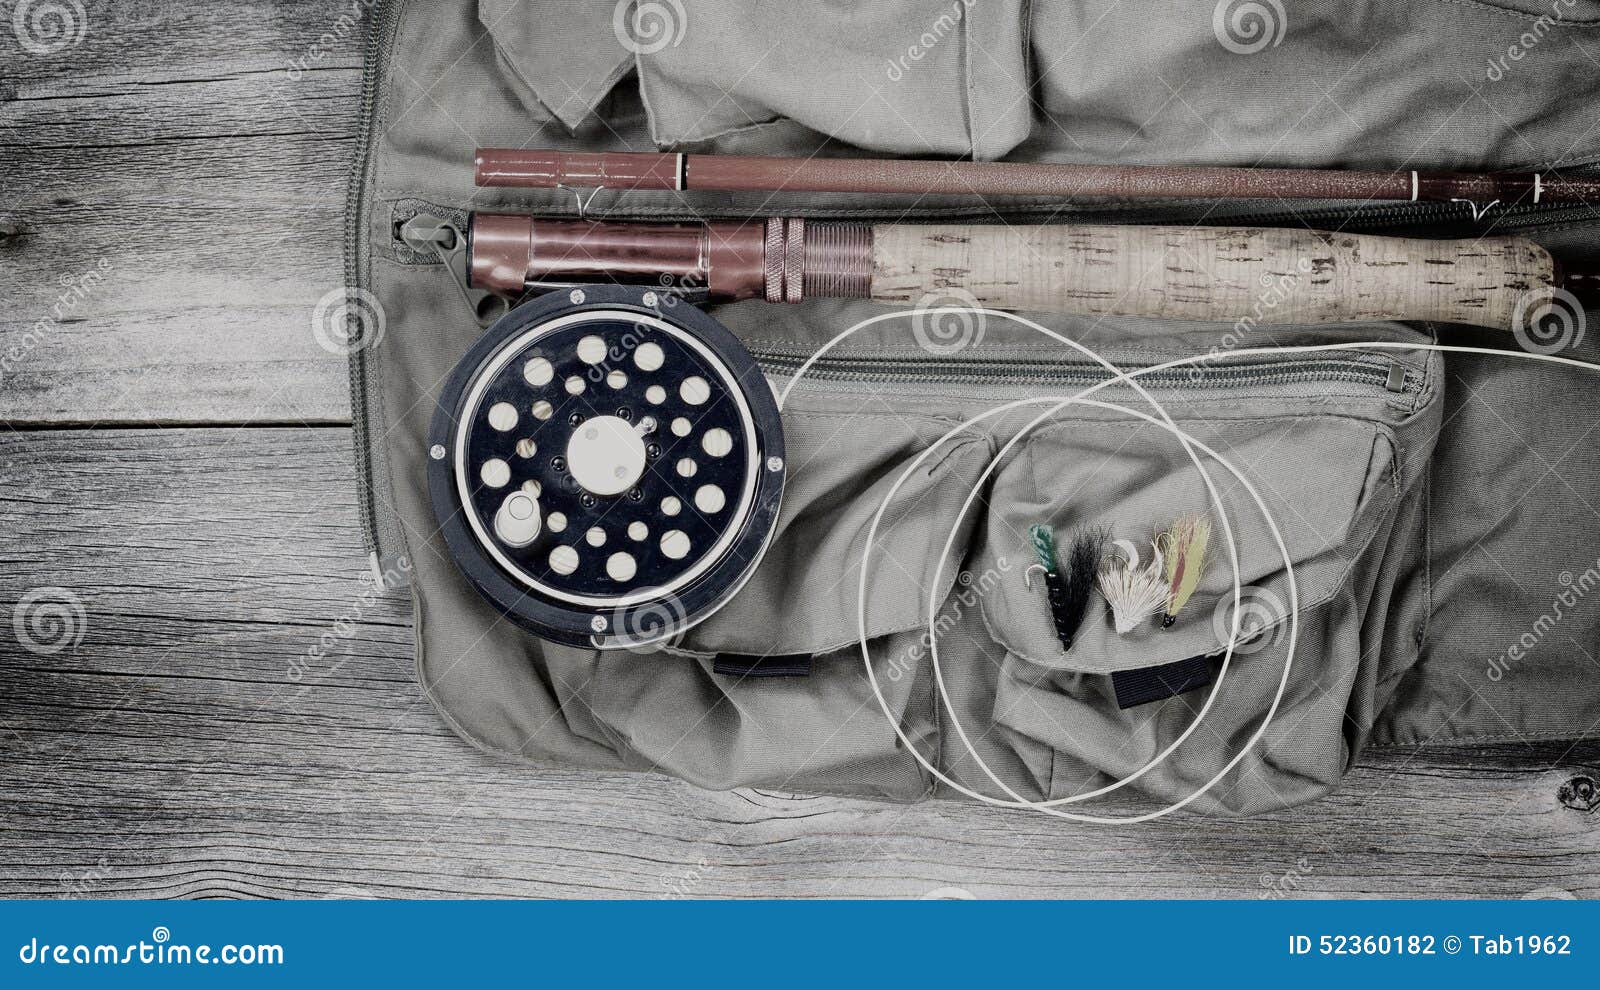 Old Trout Fishing Gear on Top of Fishing Vest Stock Photo - Image